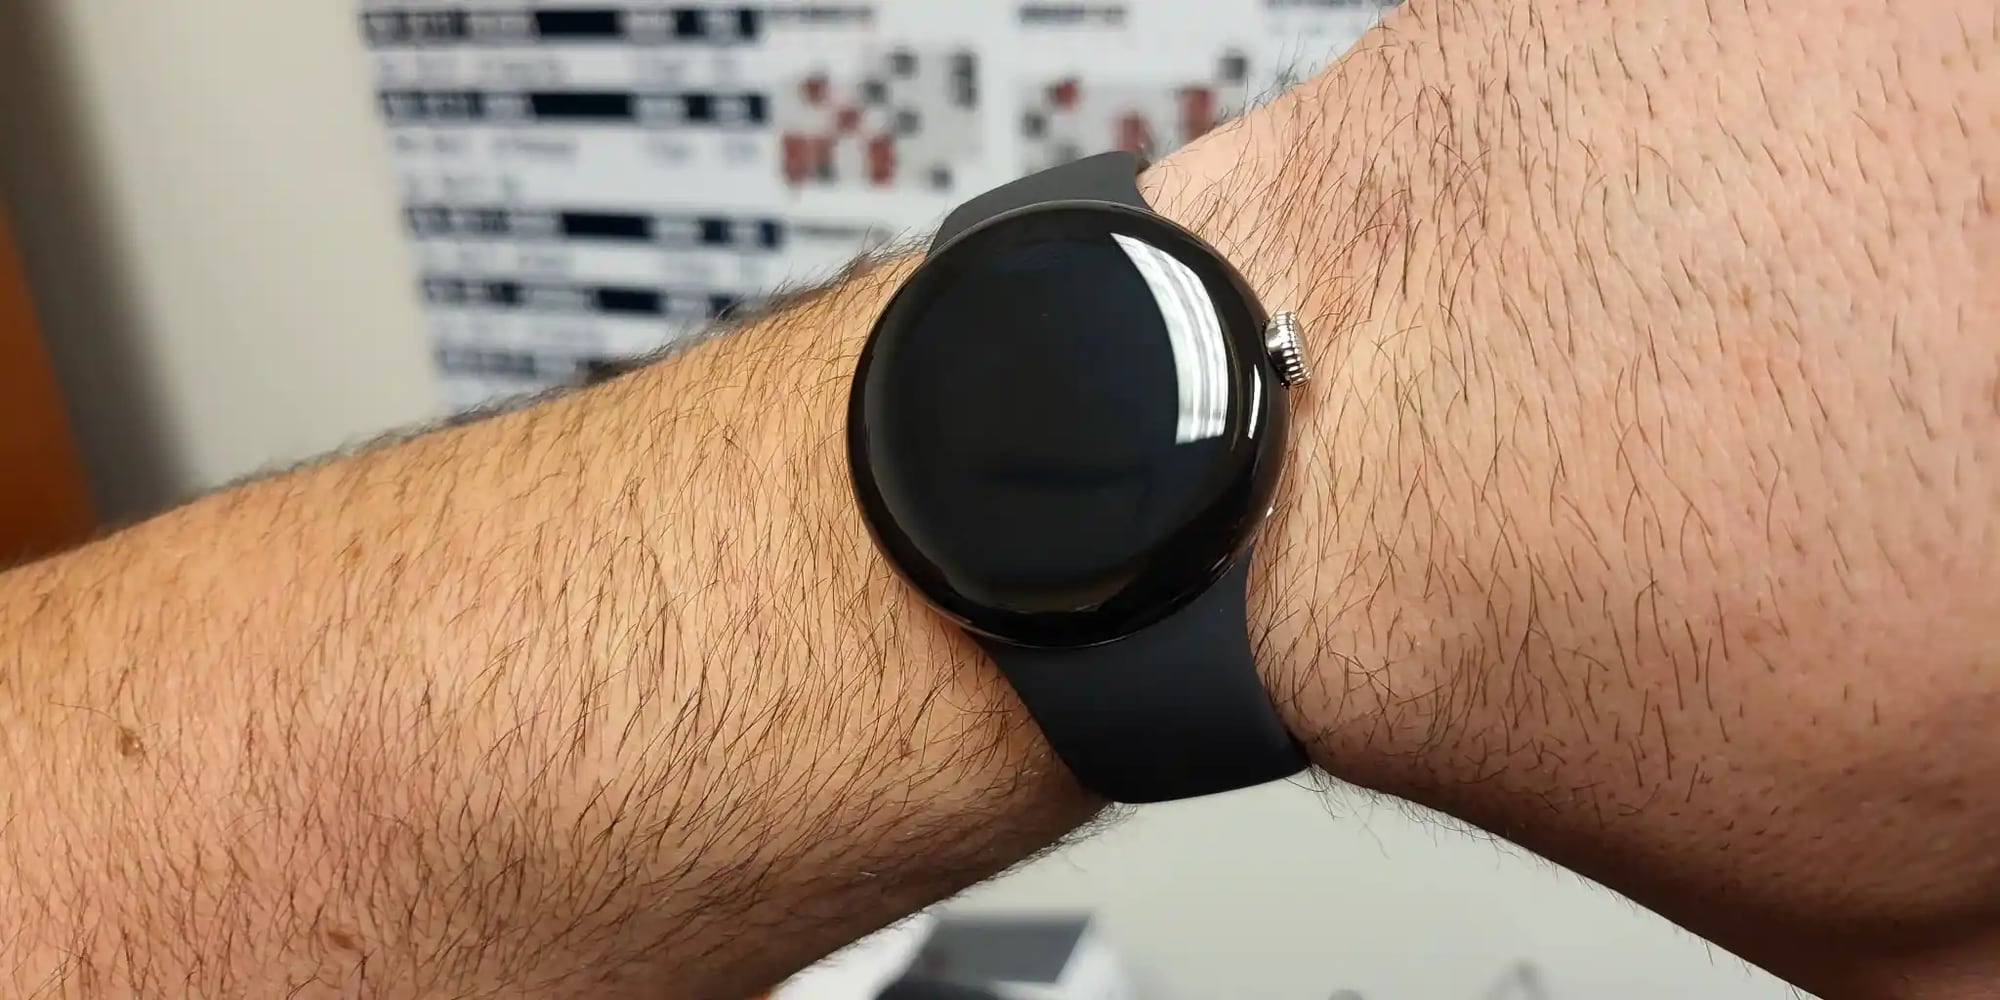 Trevor’s Tech Thoughts: Google’s “Pixel Watch” needs to at least get health and fitness right